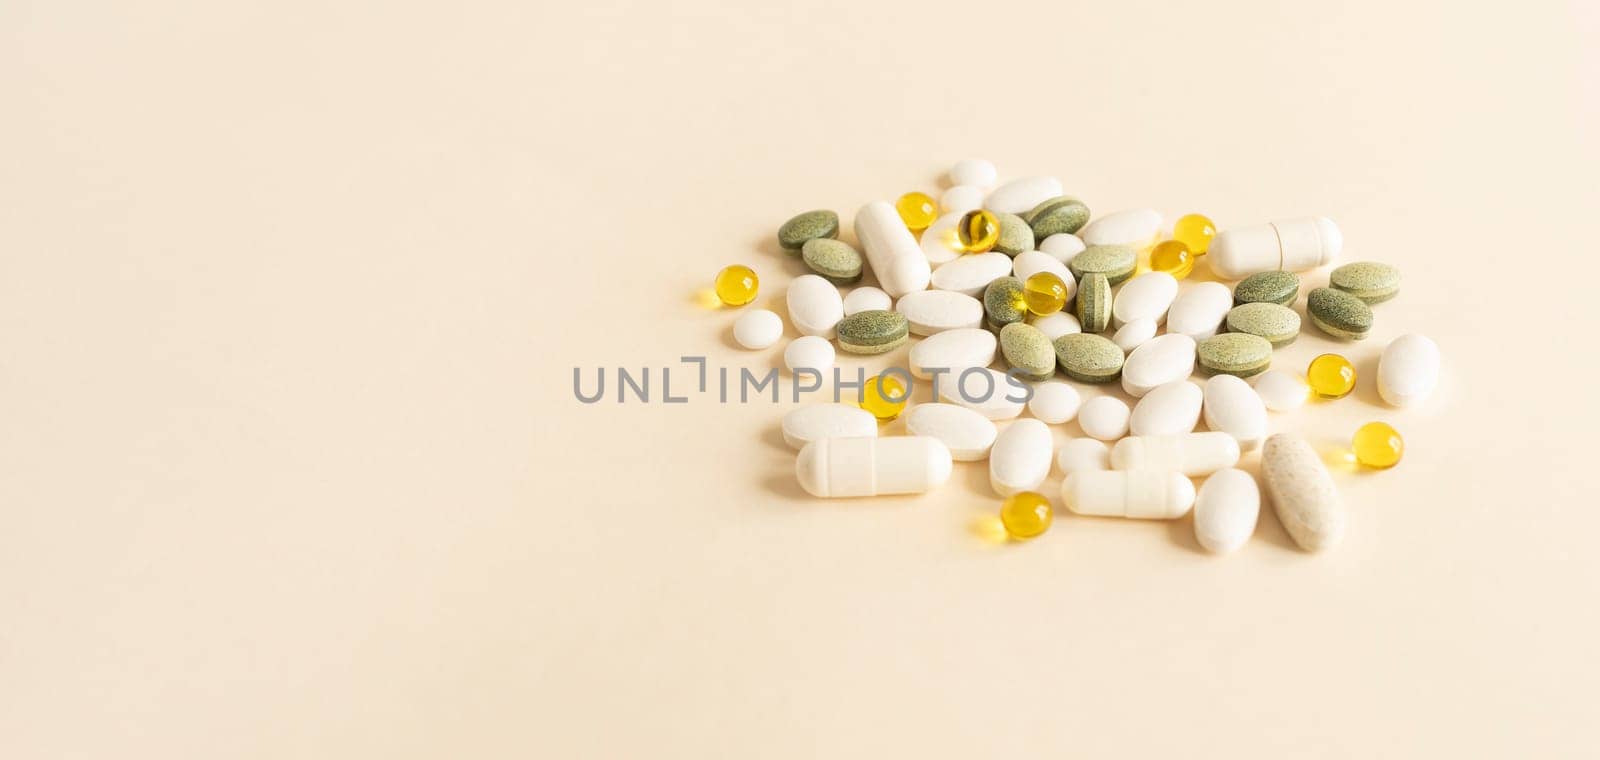 Banner Colorful Pile of Scattered Capsules, Pills, Tablets on Beige Background. Various Medical Supplements, Vitamins or Drug Pharmaceutical Concept. Copy Space For Text. Health Insurance, Horizontal. by netatsi